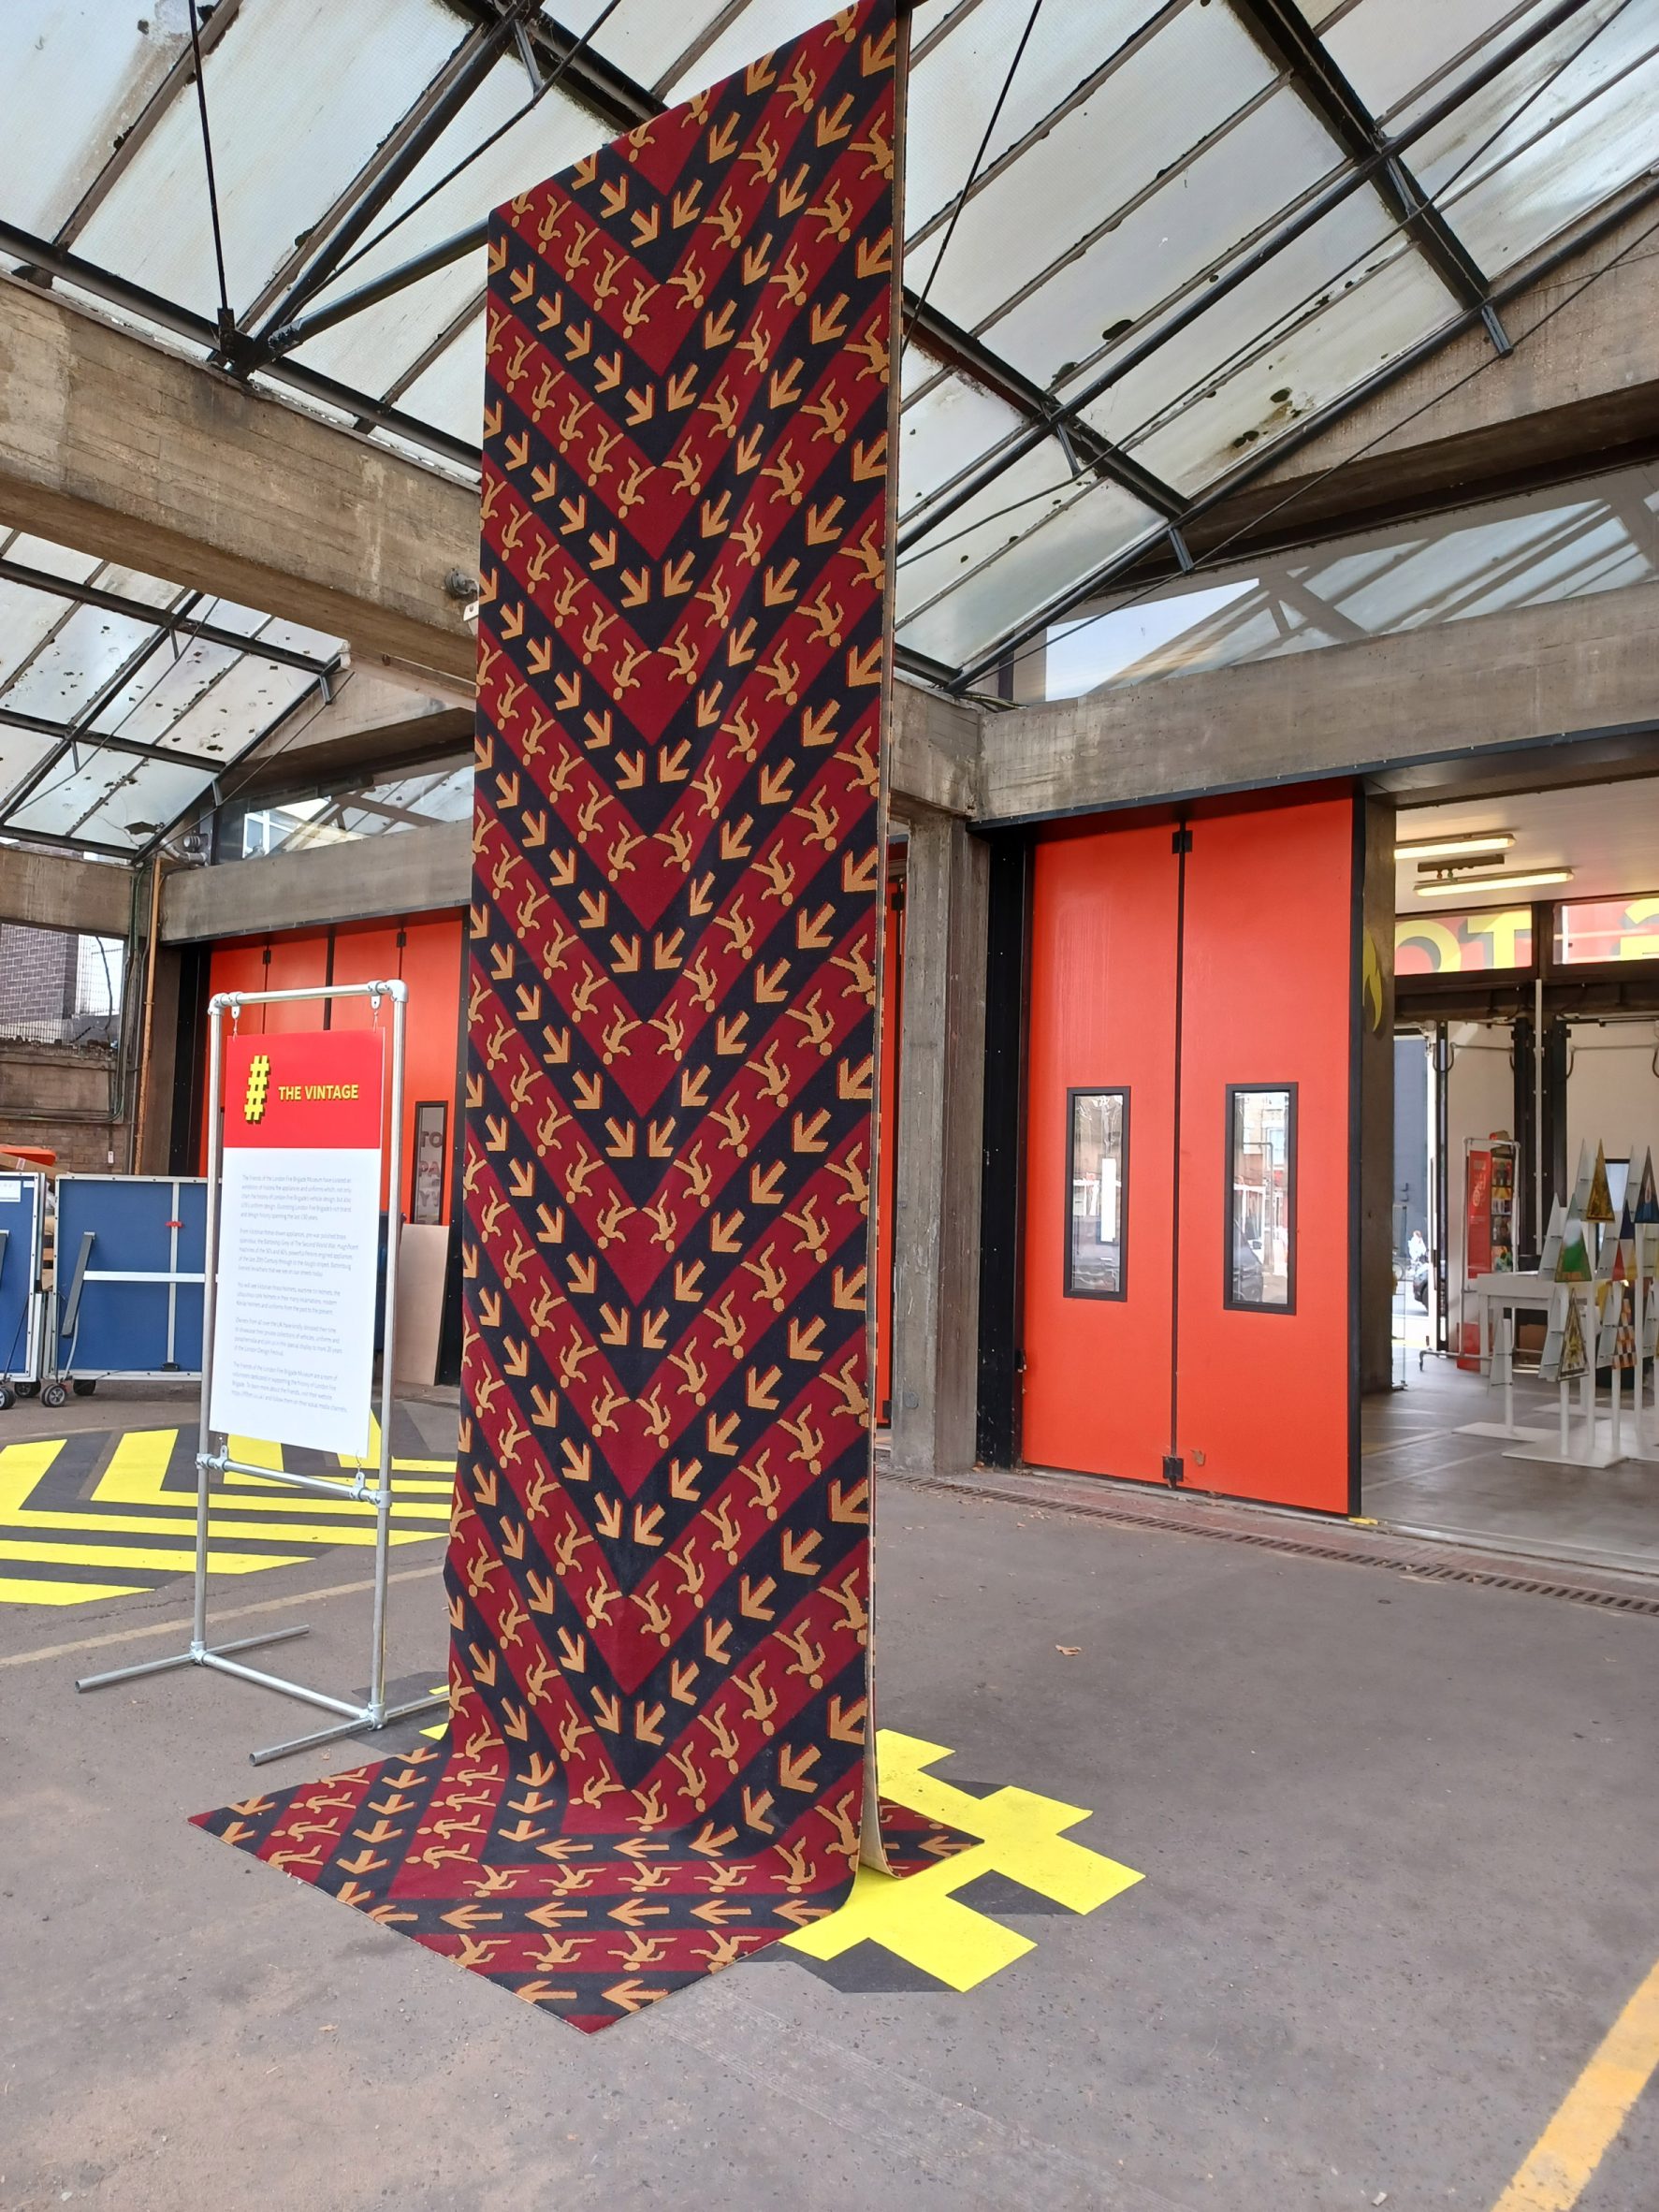 Rug hanging from the beams at Shoreditch Fire Station